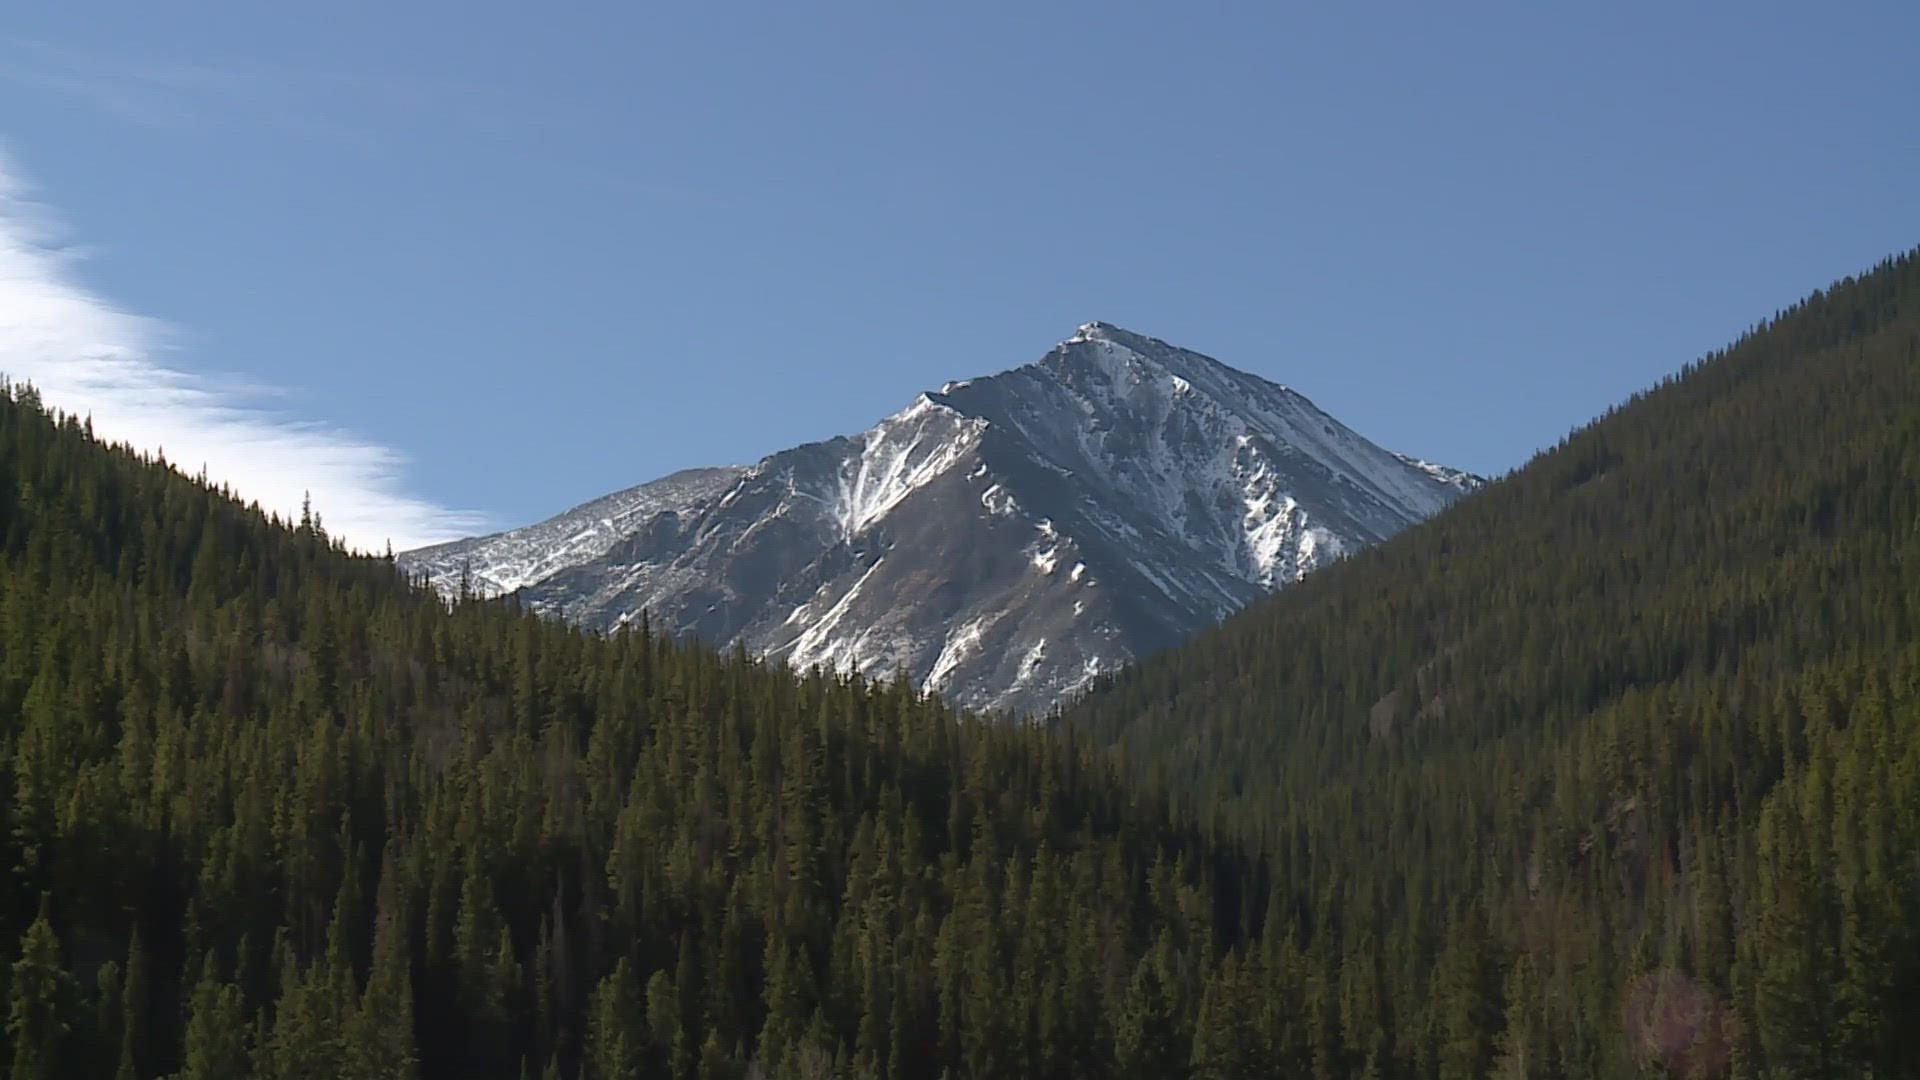 Hydrologists say Colorado's snowpack - snow that gradually accumulates in the mountains from October to April - is off to a great start. Cory Reppenhagen explains.